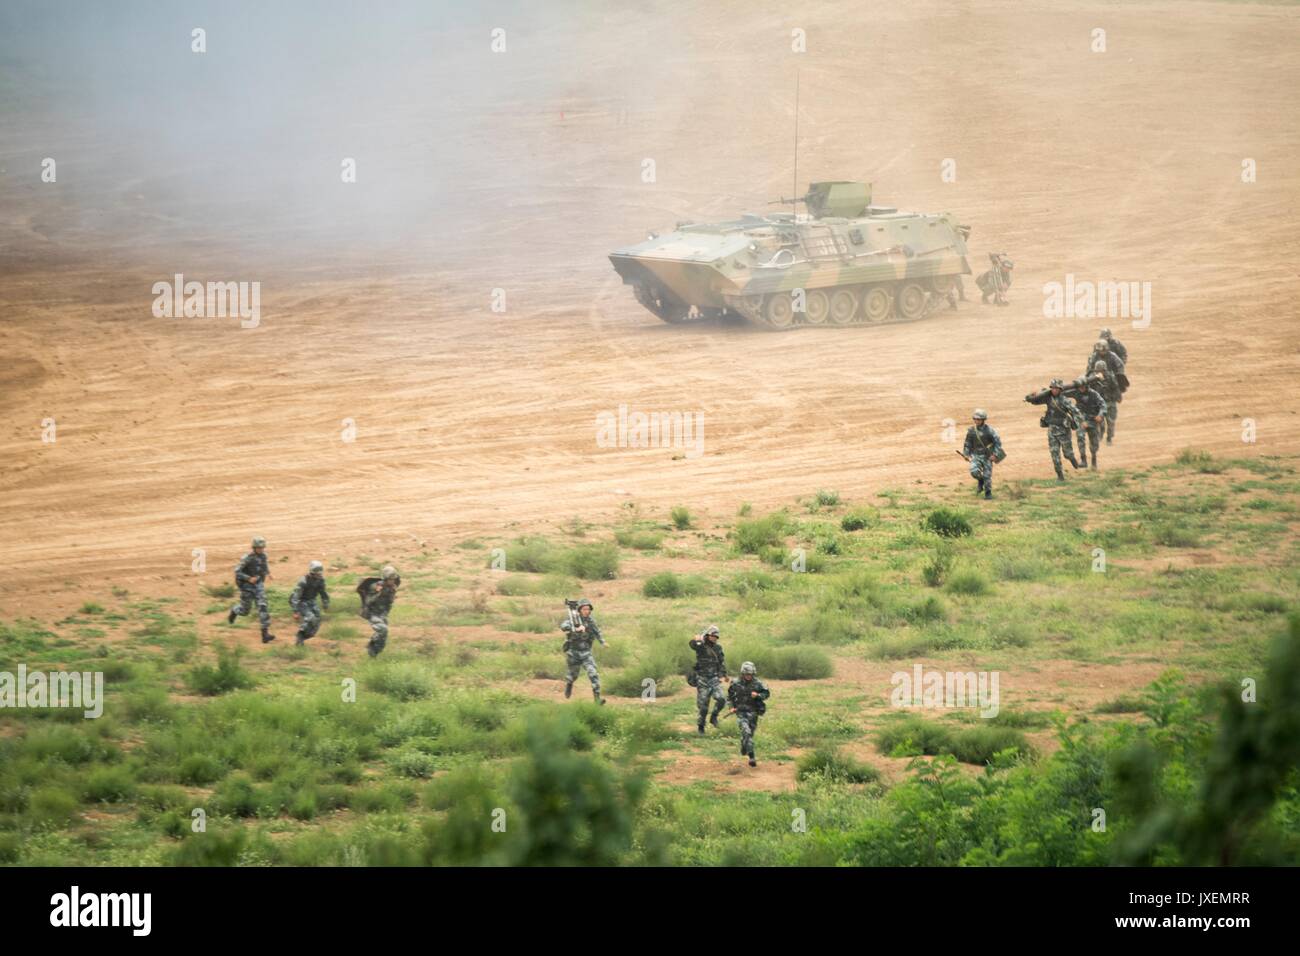 Haichung, China. 16th Aug, 2017. People's Liberation Army soldiers deploy with anti-tank weapons from a WZ531 armored personal carrier during an attack exercise at the Chinese Northern Theater Command Army Force Haichung Camp August 16, 2017 in Haichung, China. The exercise was for visiting U.S. Chairman of the Joint Chiefs Gen. Joseph Dunford. Credit: Planetpix/Alamy Live News Stock Photo